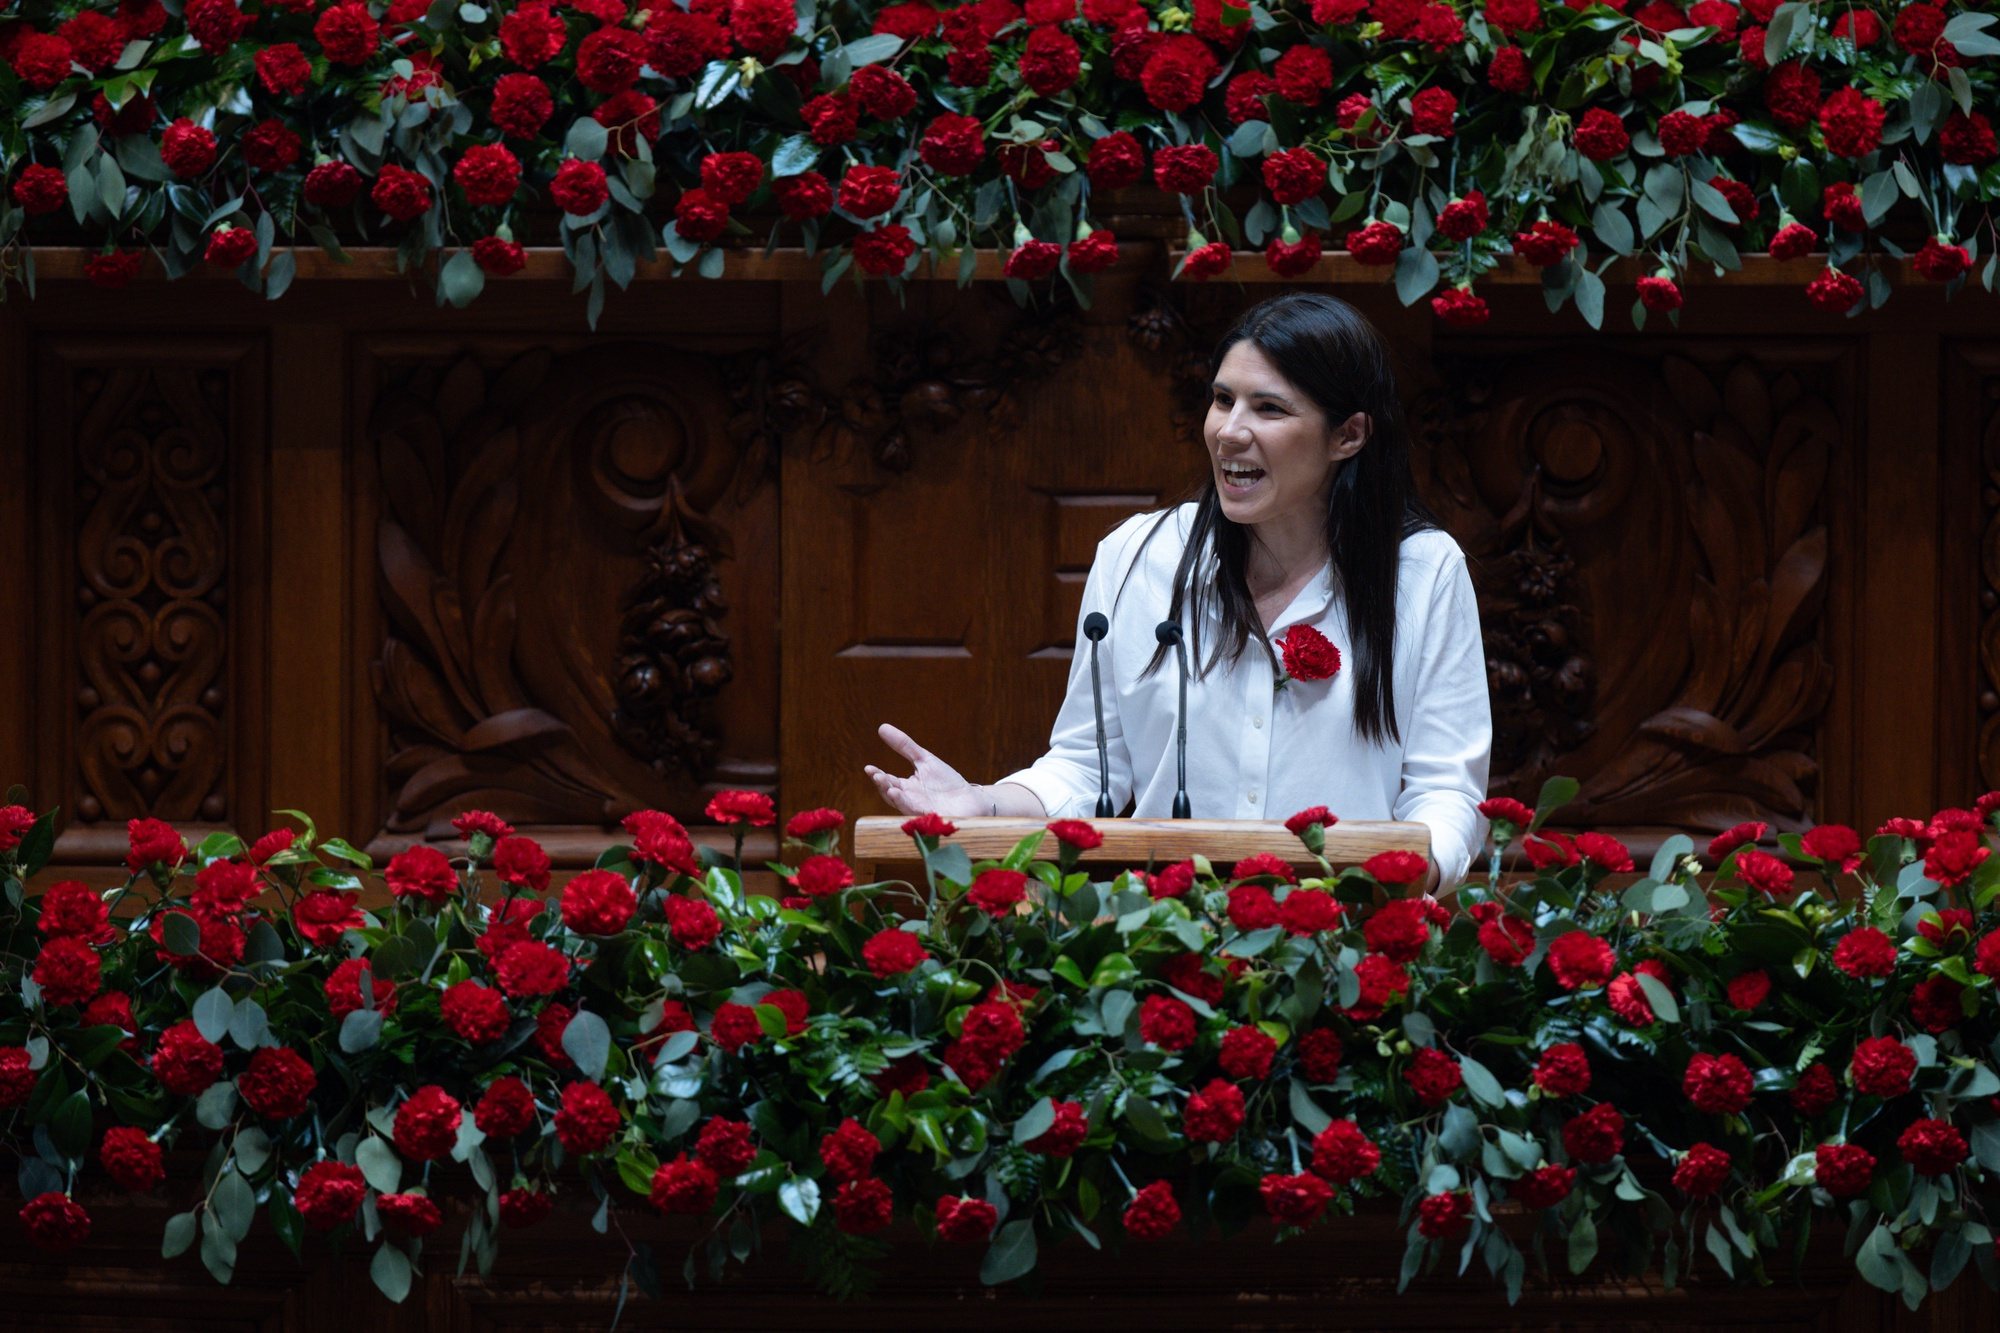 Portuguese leader of the Left Block (BE), Mariana Mortagua, delivers a speech during the solemn comemorative session at the Portuguese parliament in Lisbon, Portugal, 25 April 2024. Portugal celebrates the 50th anniversary of the Carnation Revolution that ended the authoritarian regime of Estado Novo (New State) that ruled the country between 1926 to 1974. JOSE SENA GOULAO/LUSA